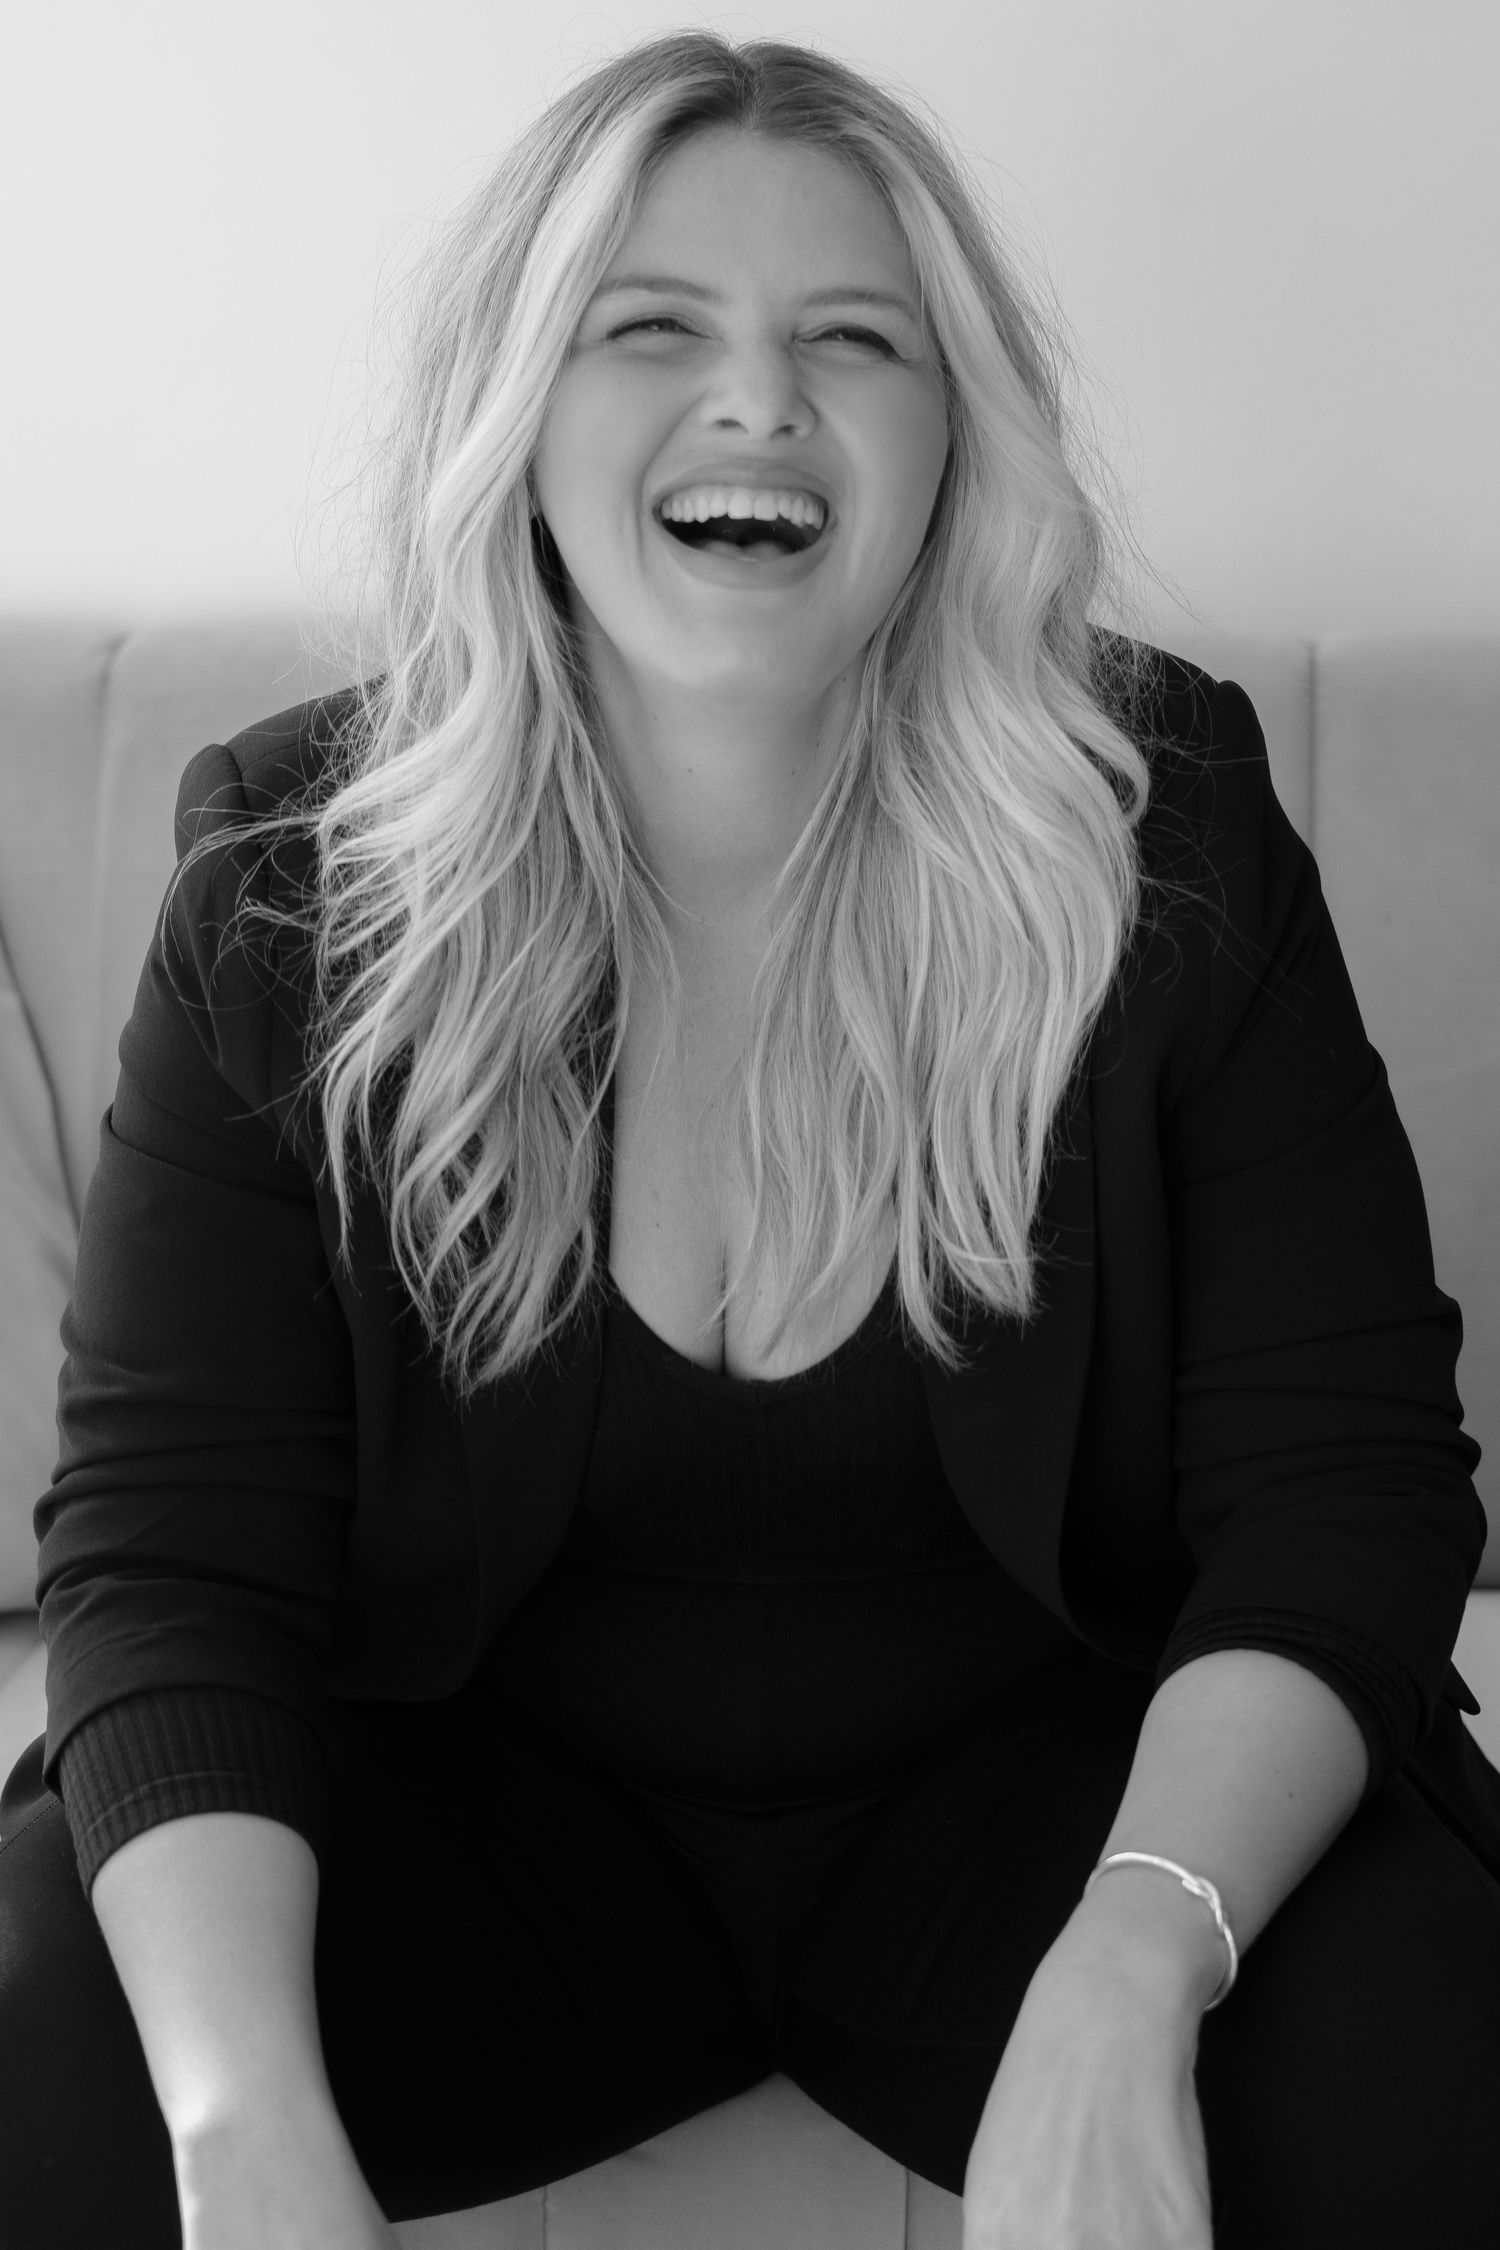 Blonde woman in black outfit smiling and laughing on a couch